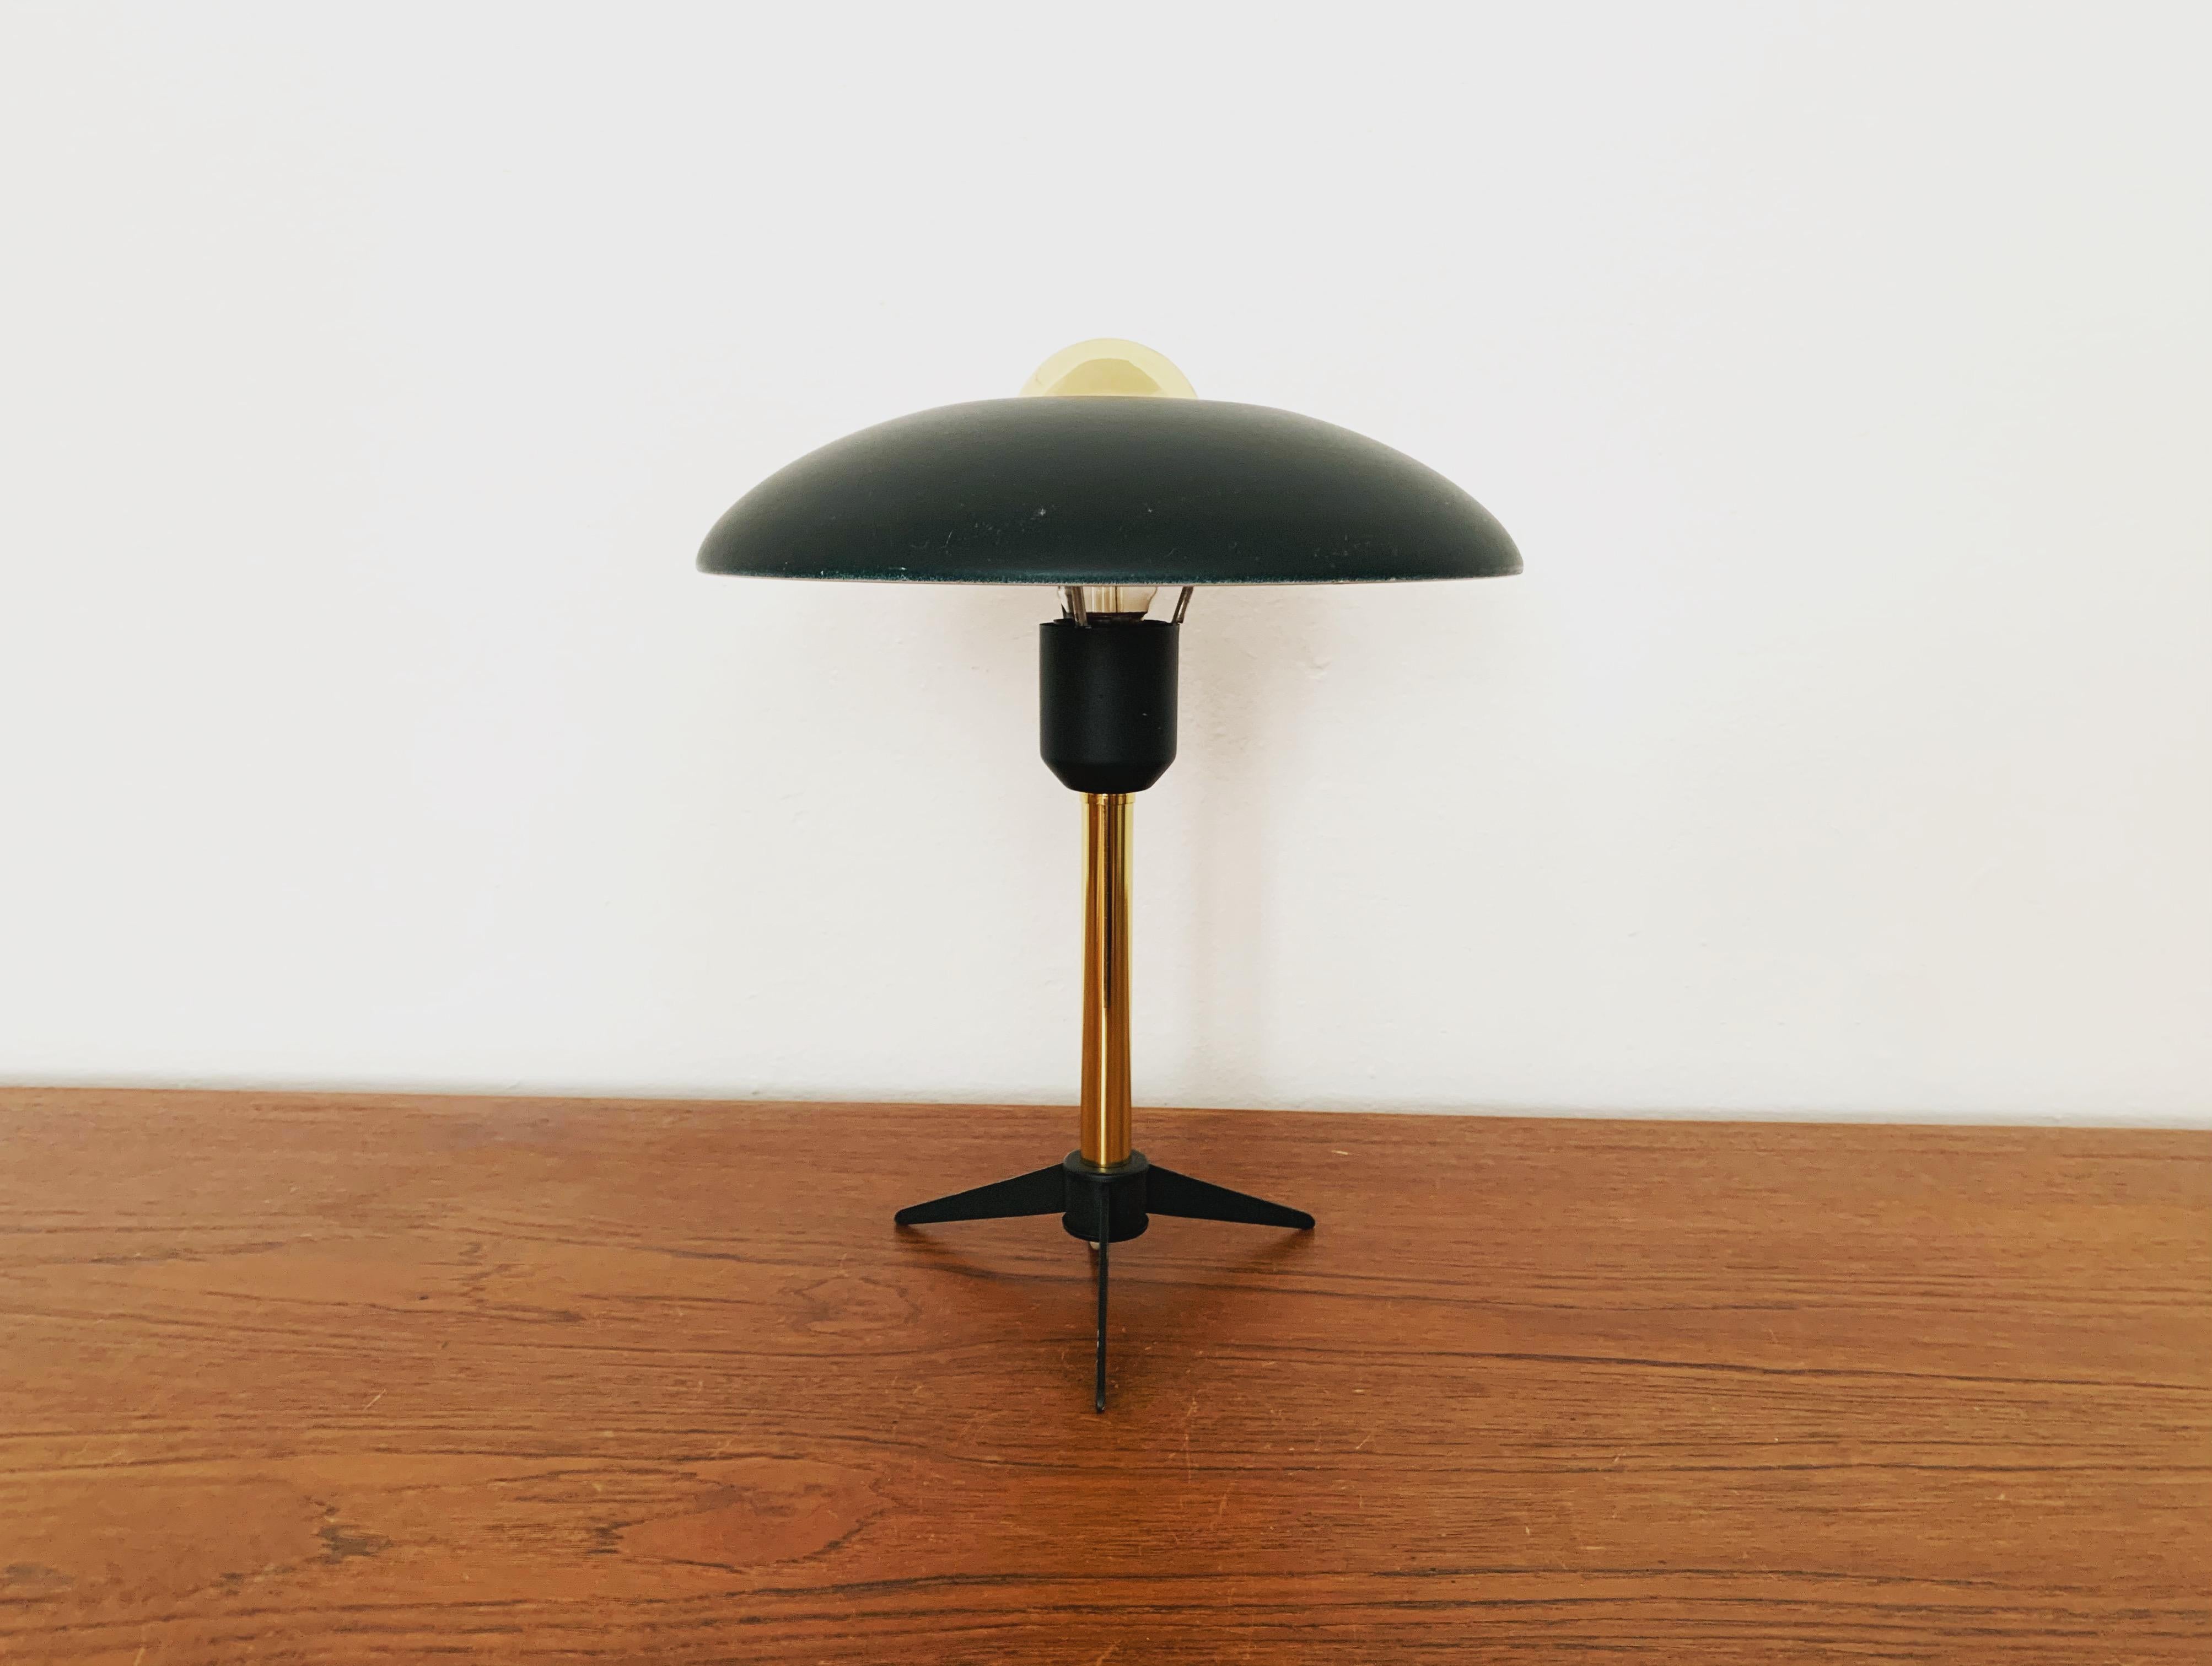 Wonderful table lamp from the 1950s by Louis Kalff.
Fantastic mid-century design.
The combination of high-quality workmanship and loving details enriches every home.

Manufacturer: Phillips

Condition:

Very good vintage condition with slight signs